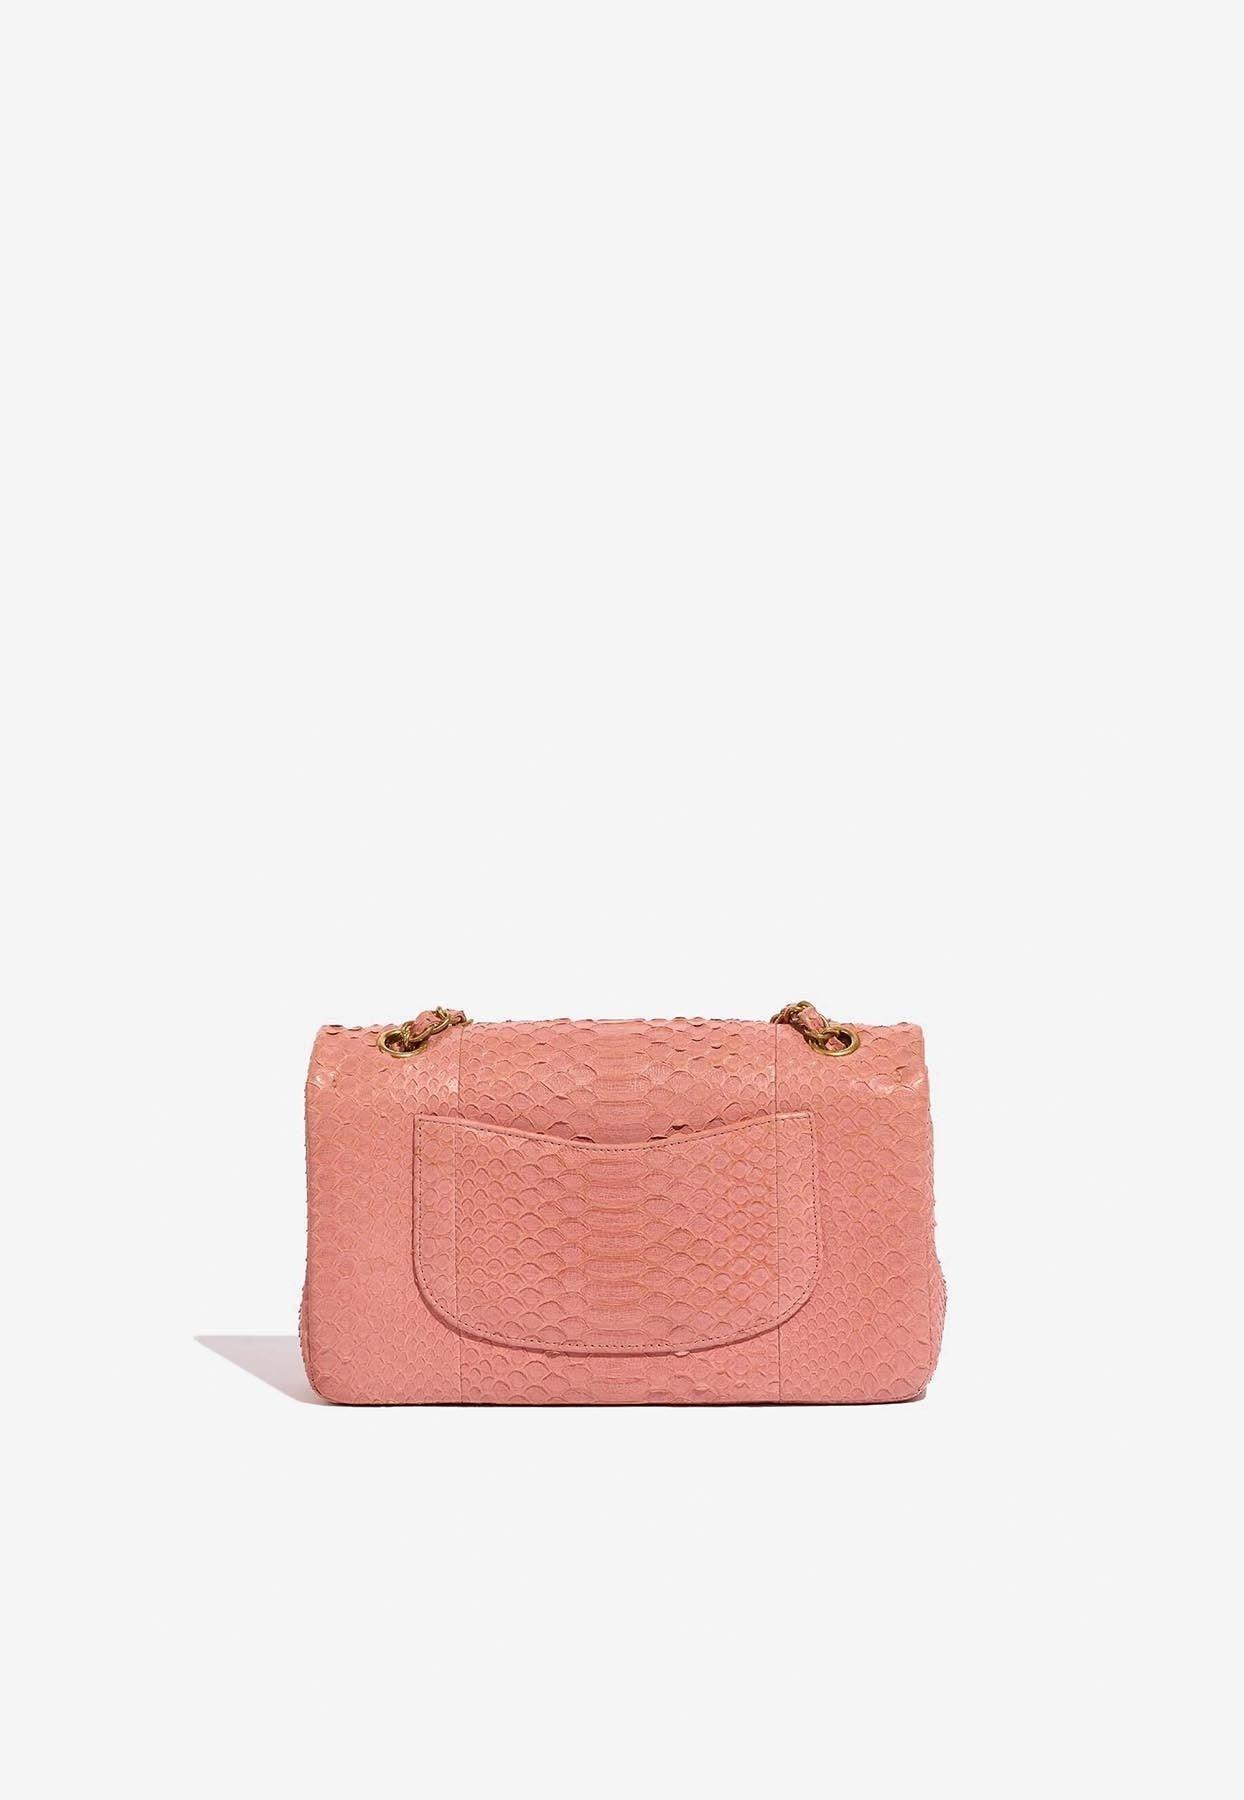 Chanel Medium Timeless Shoulder Bag In Dusty Rose Python Leather in Pink |  Lyst